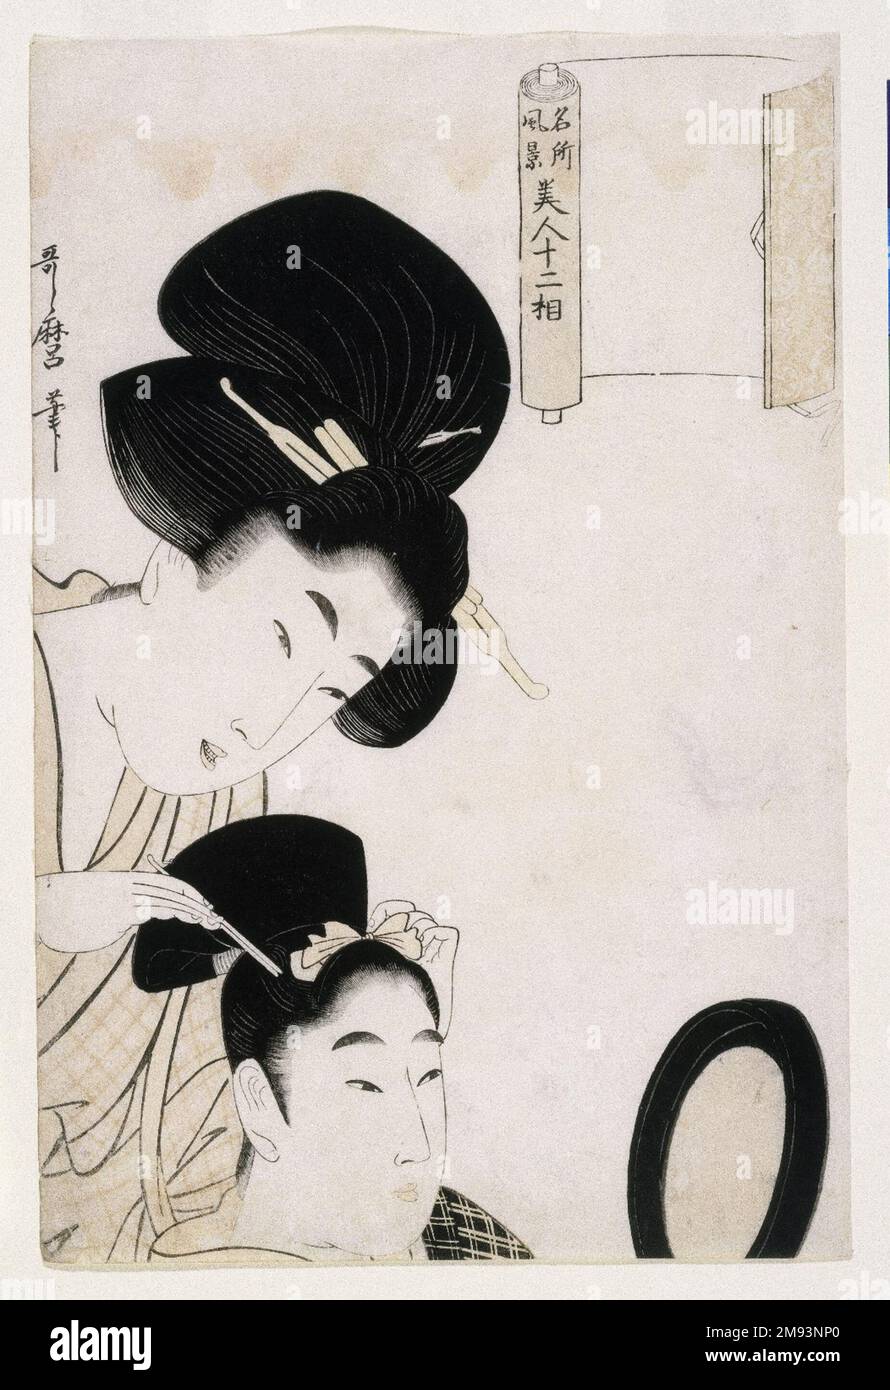 Beauty Fixing Hair, from the series Scenery of Famous Places and Twelve Physiognomies of Beauties Kitagawa Utamaro (Japanese, 1753-1806). Beauty Fixing Hair, from the series Scenery of Famous Places and Twelve Physiognomies of Beauties, ca. 1803. Color woodblock print on paper, 14 15/16 x 9 15/16 in. (38.0 x 25.2 cm).   Asian Art ca. 1803 Stock Photo